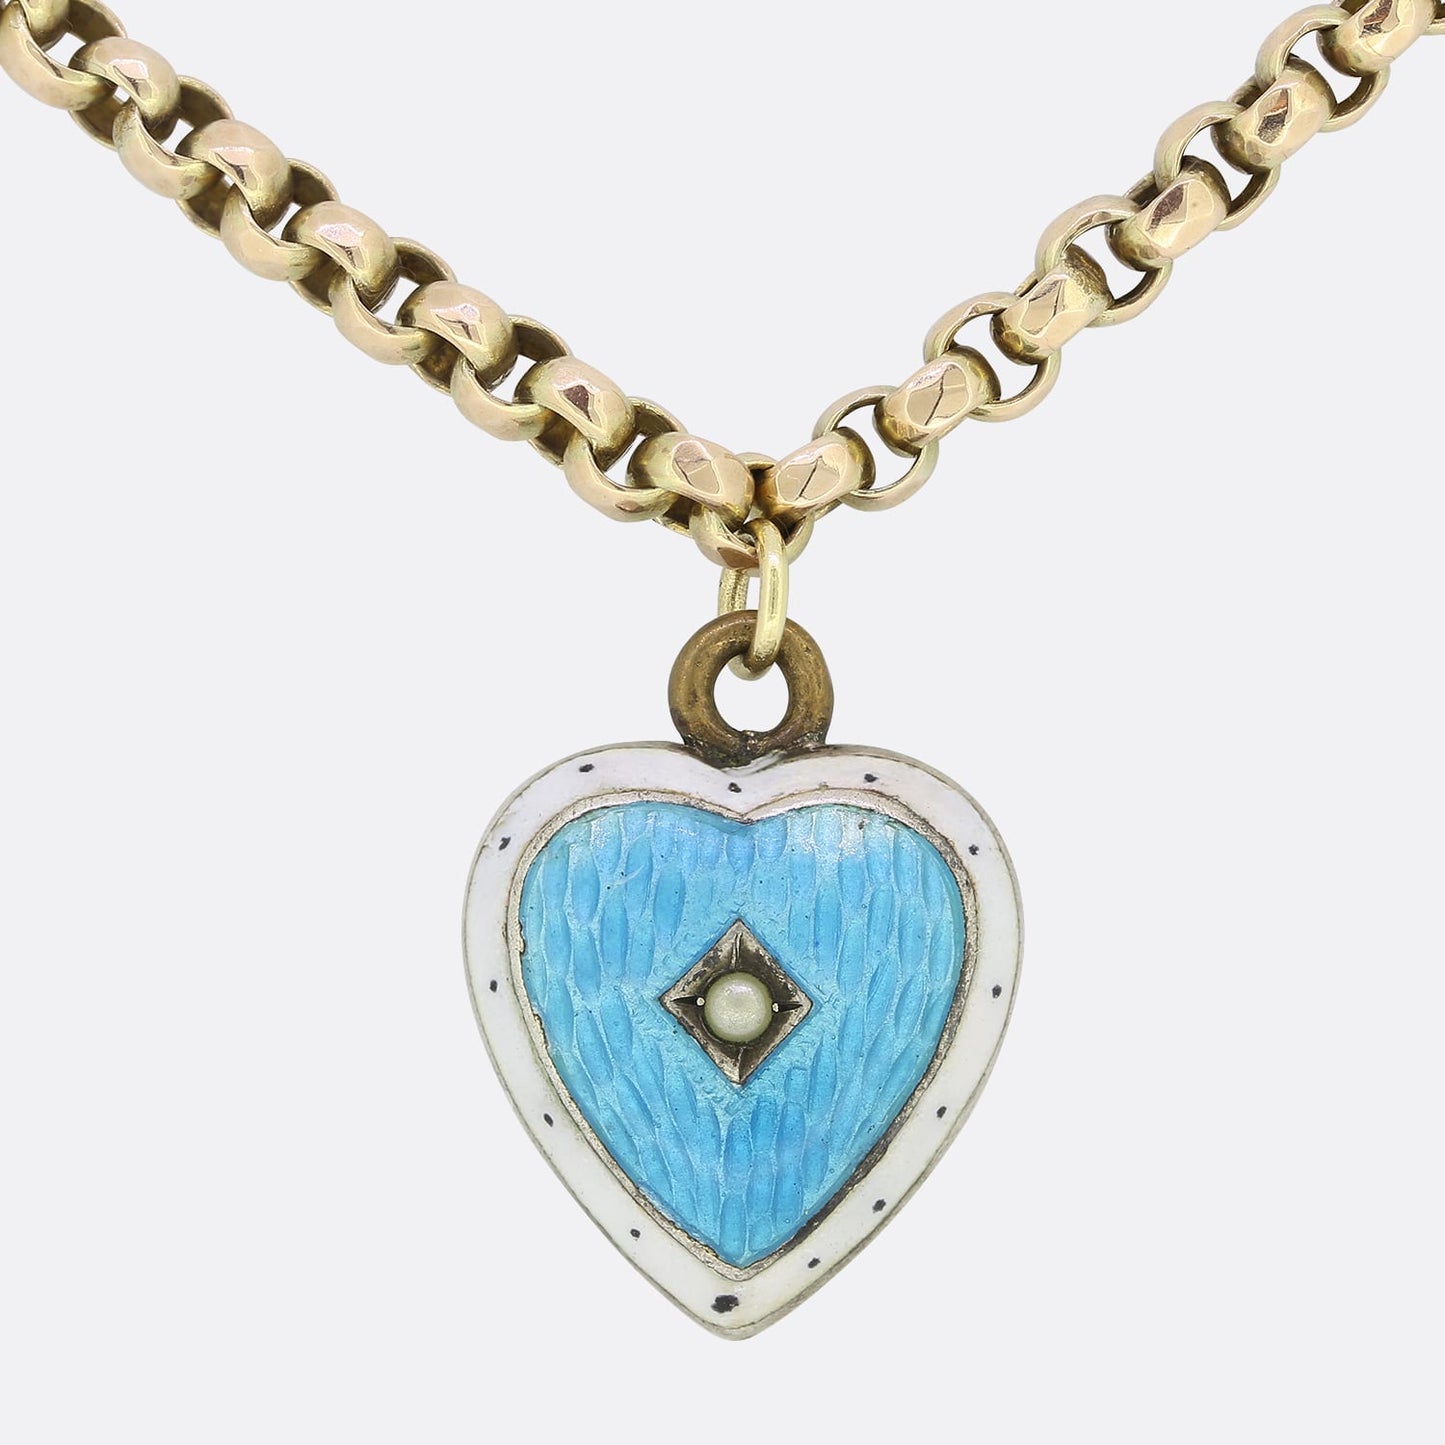 Georgian Turquoise Charming Heart Necklace